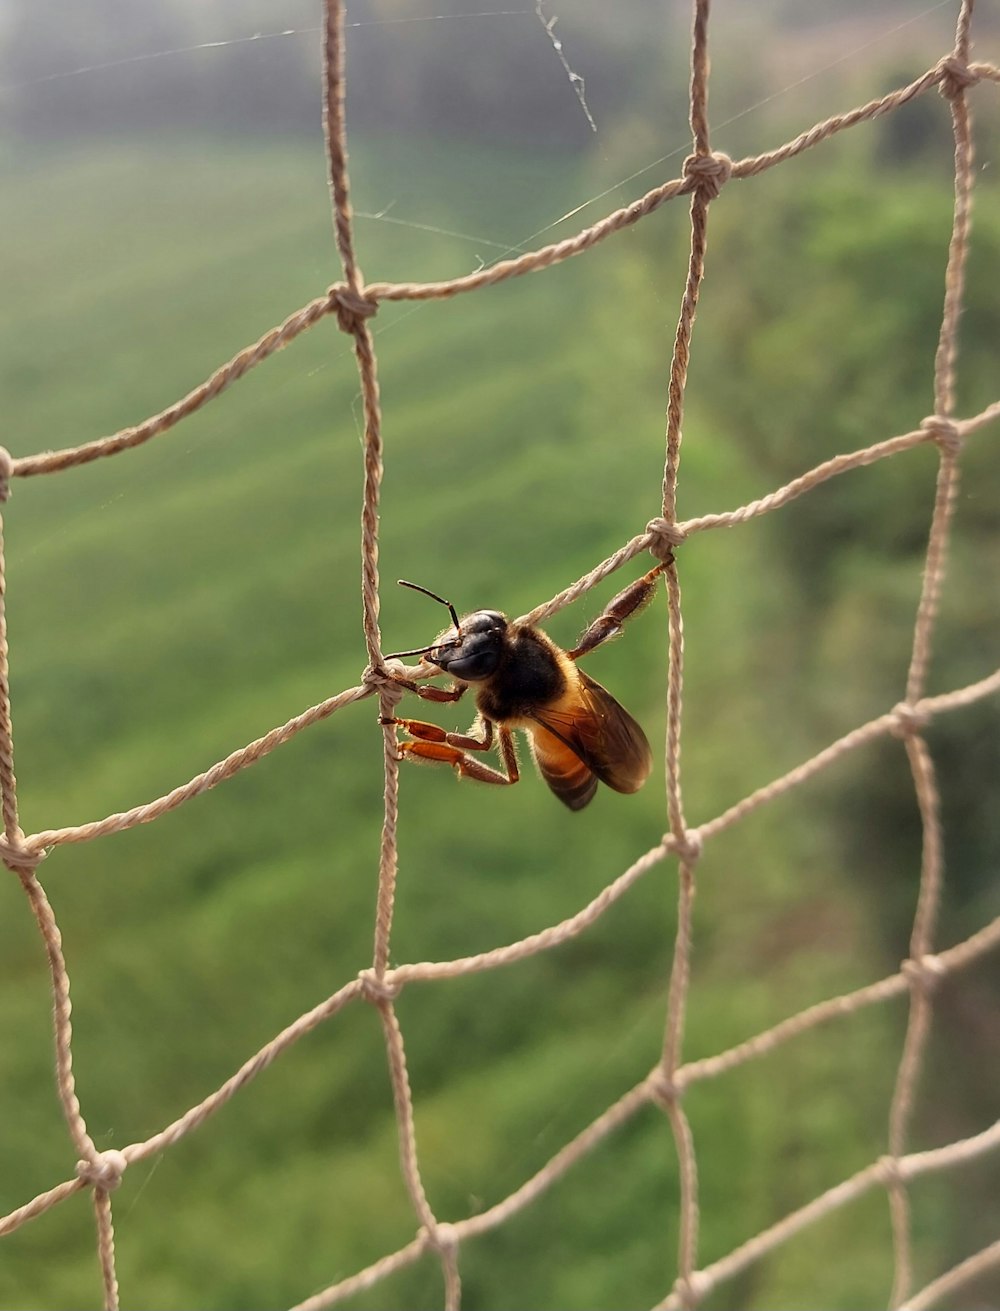 a yellow and black insect hanging on a net